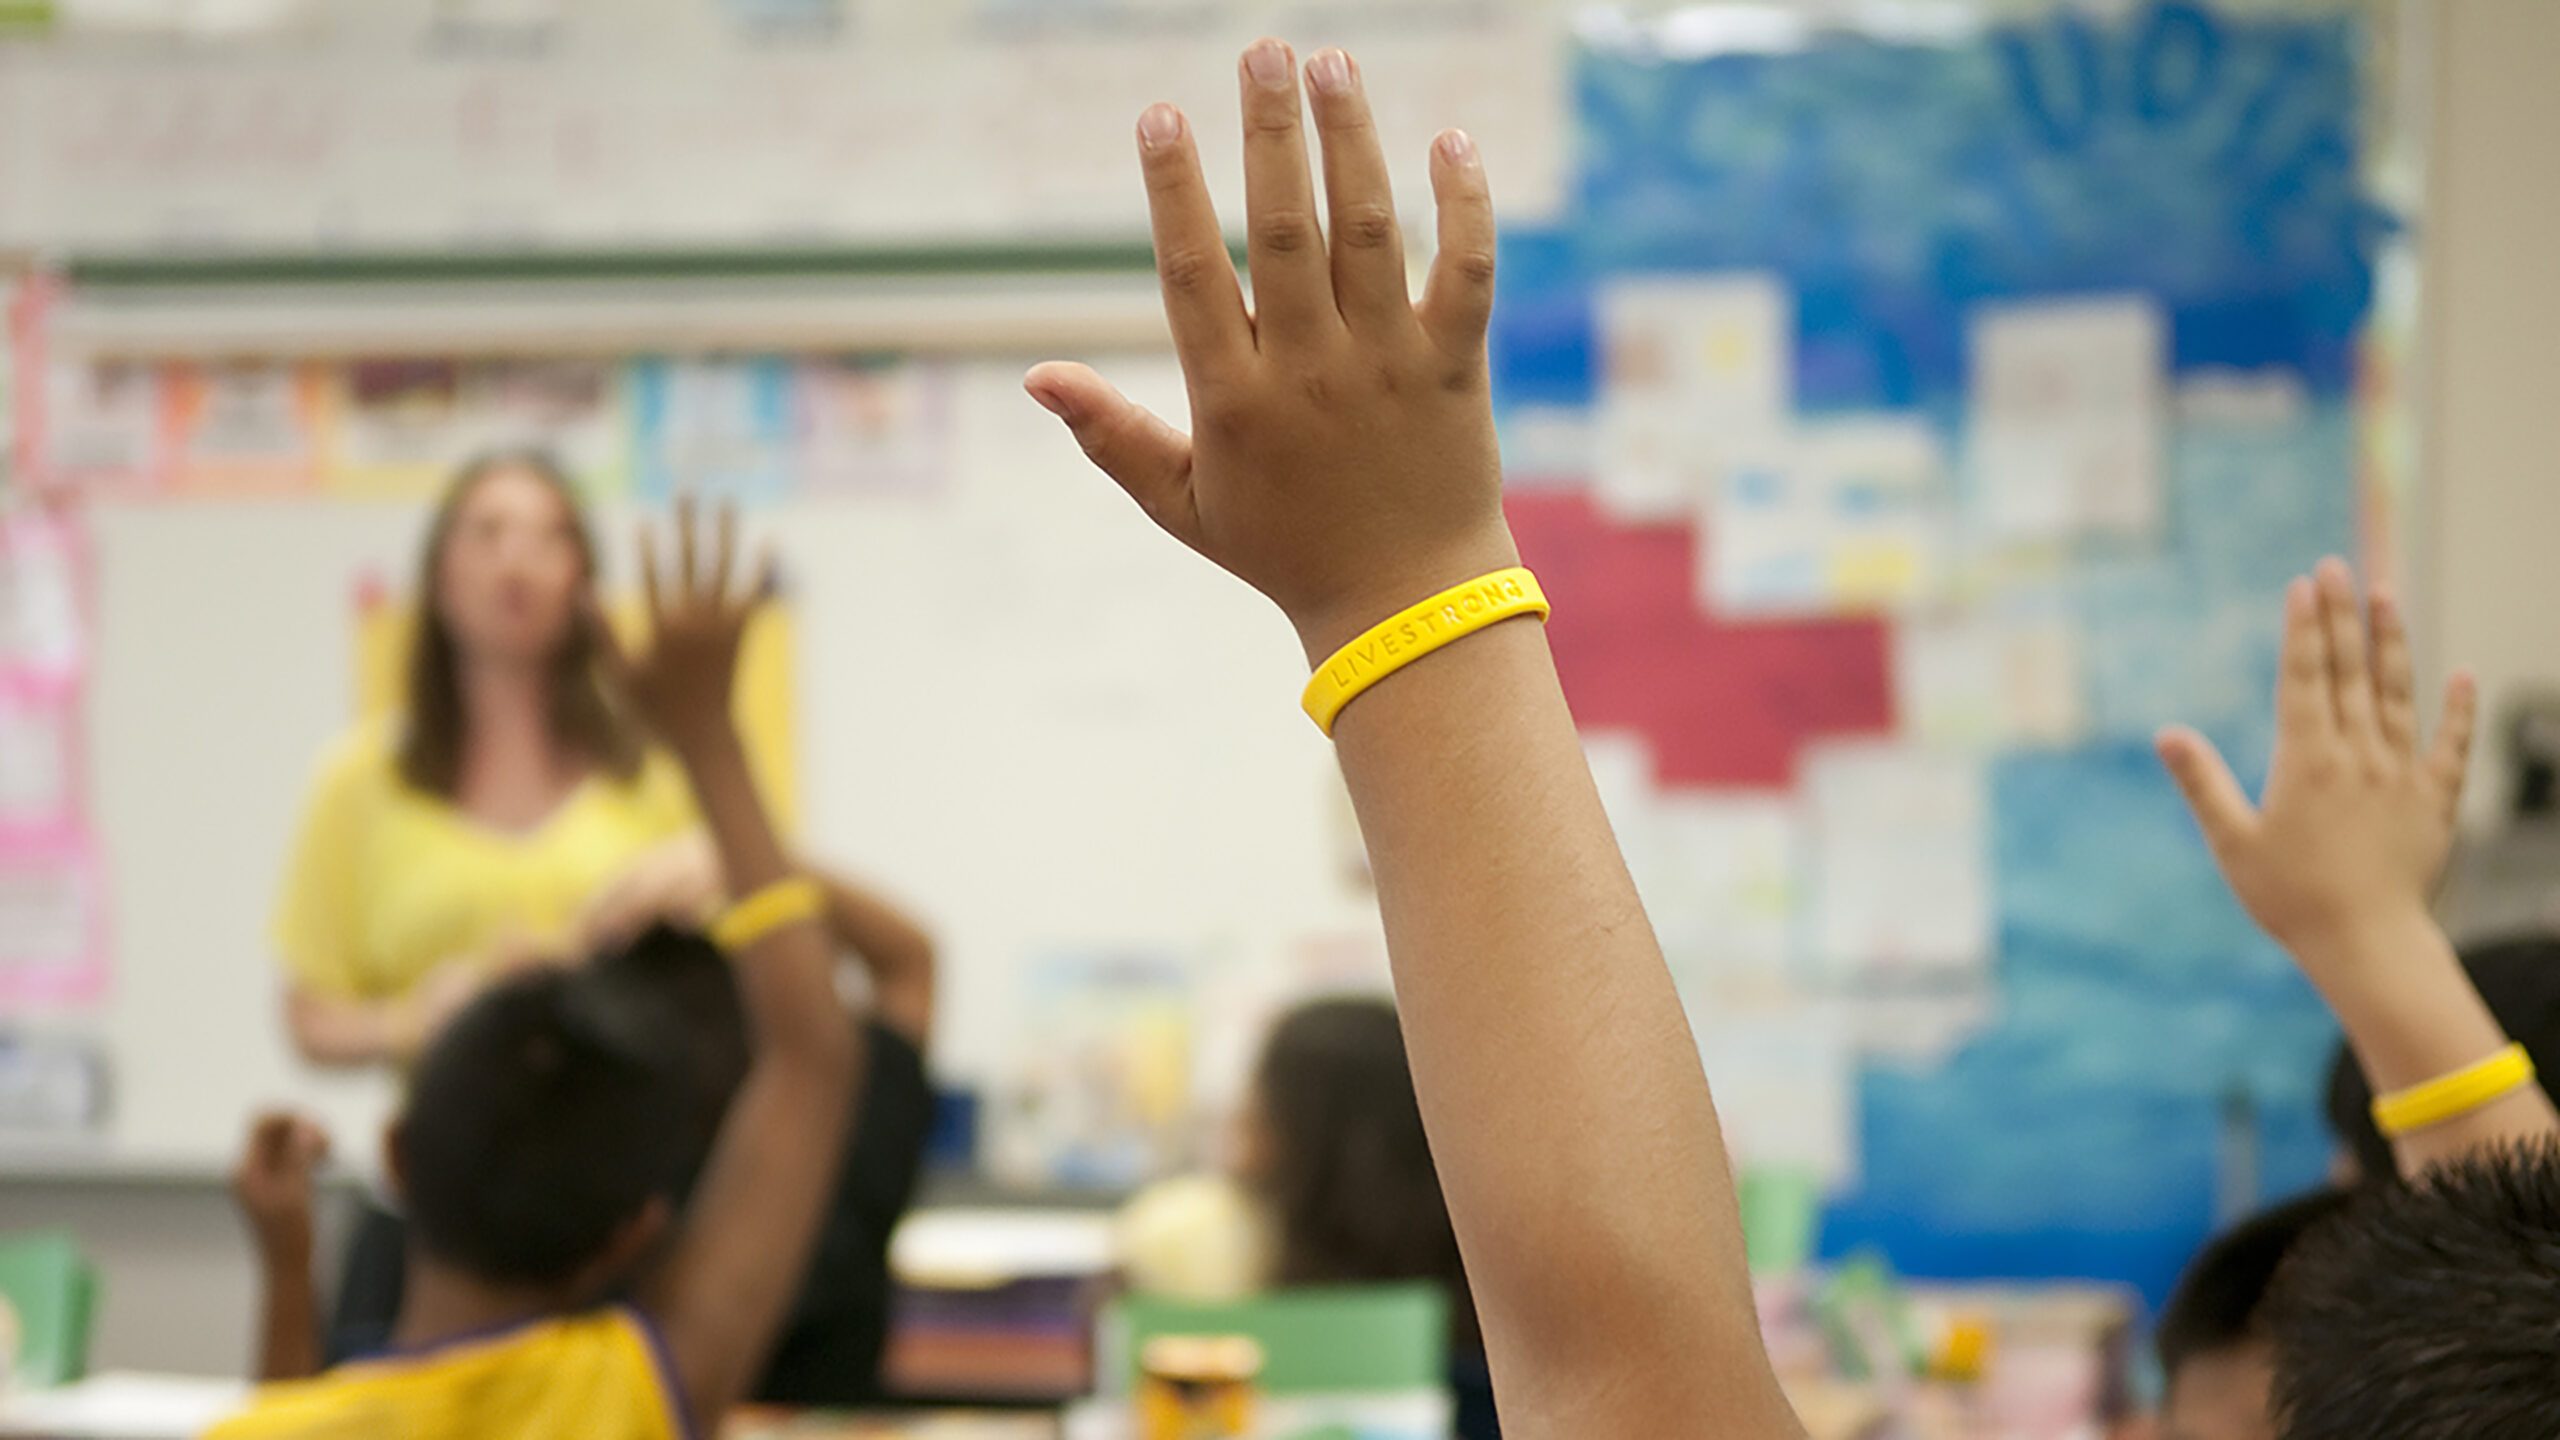 Hand wearing yellow Livestrong wristband raised in a classroom